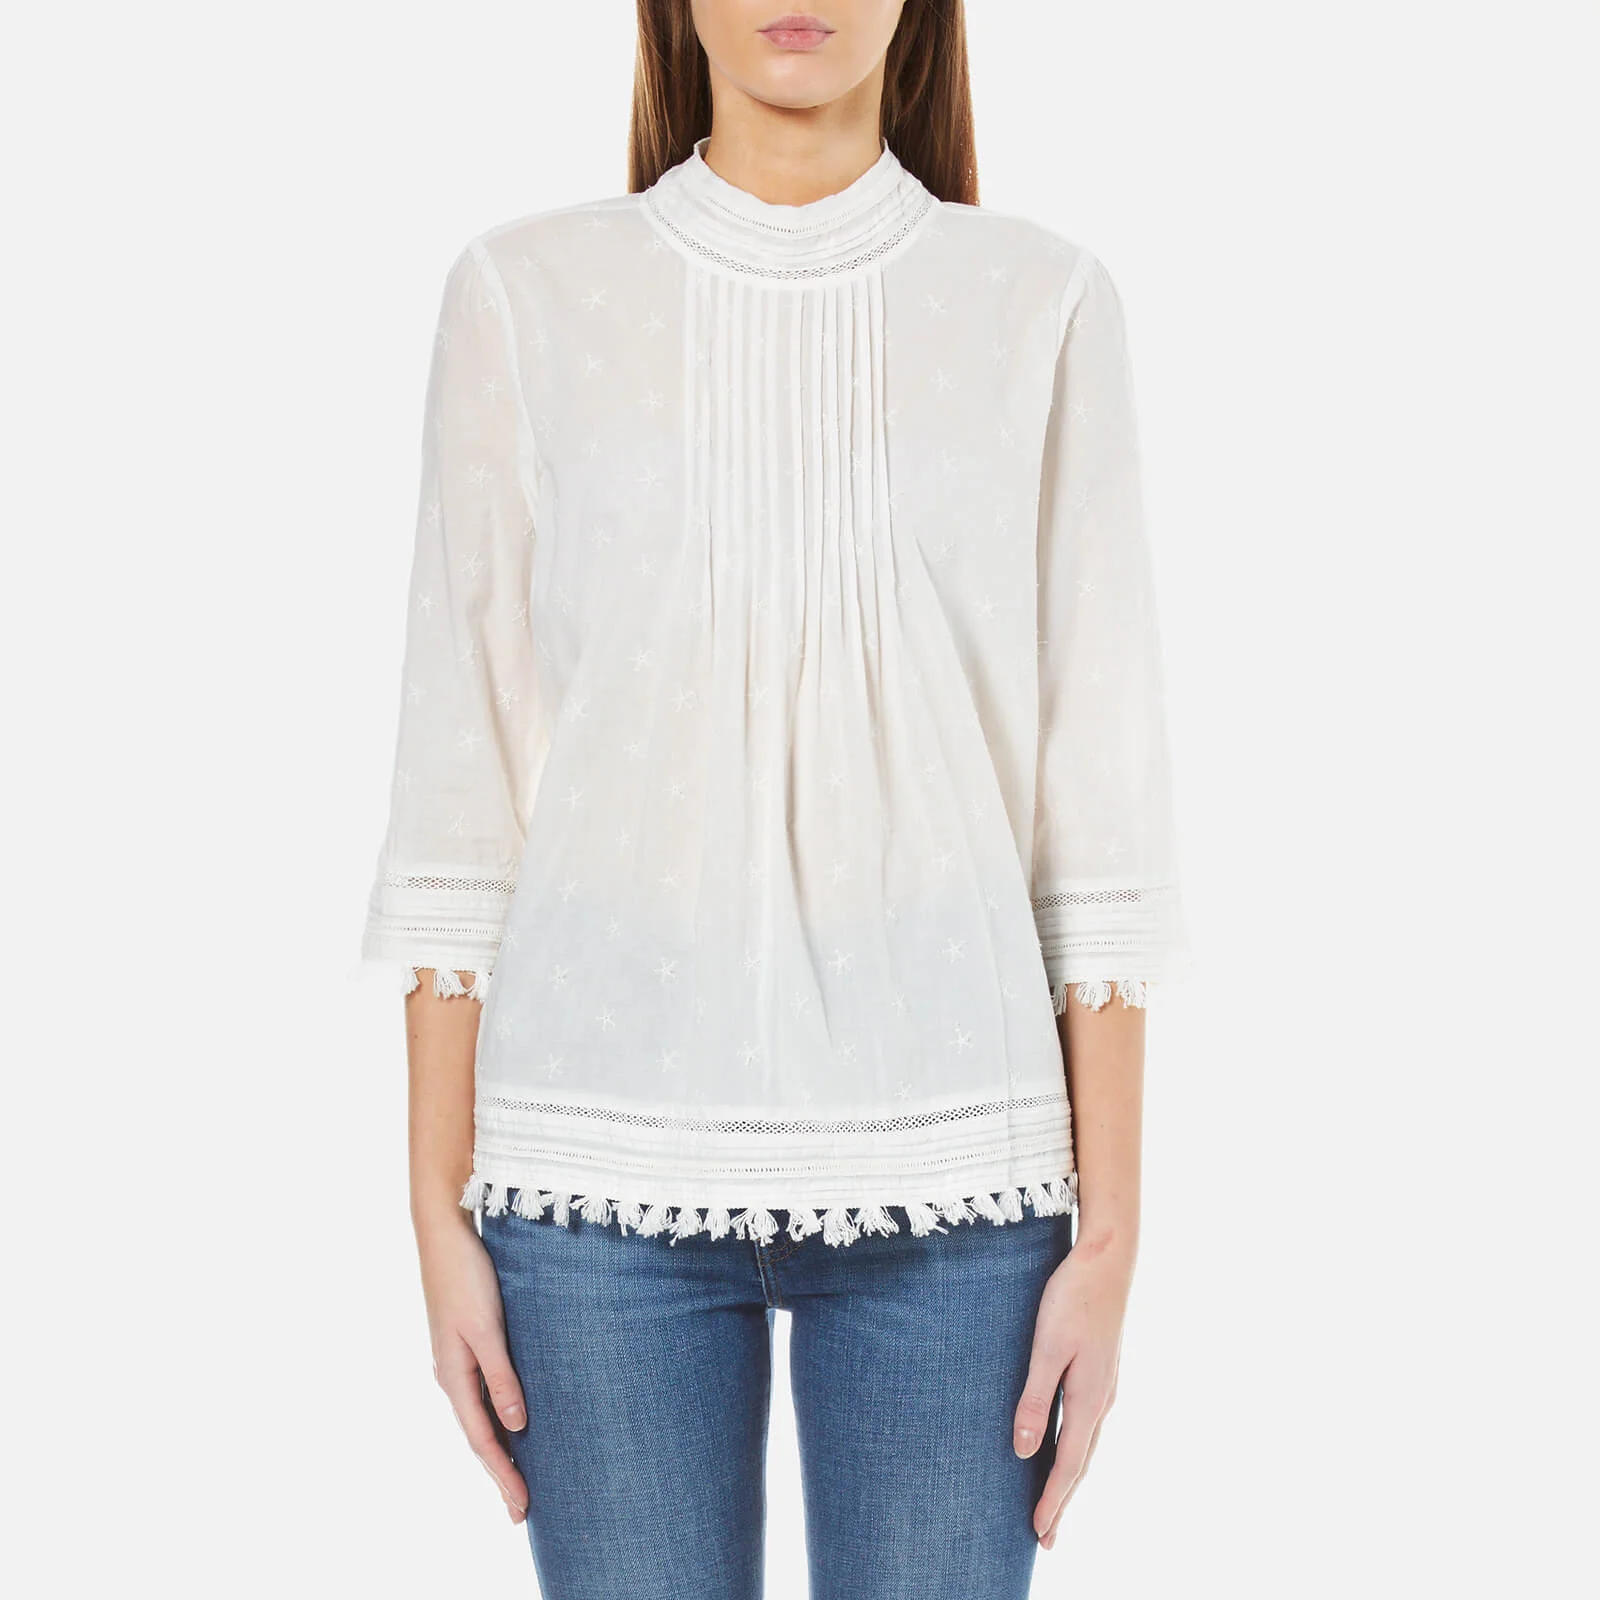 Maison Scotch Women's 3/4 Sleeve Woven Top with Embroidered Star Allover - White Image 1